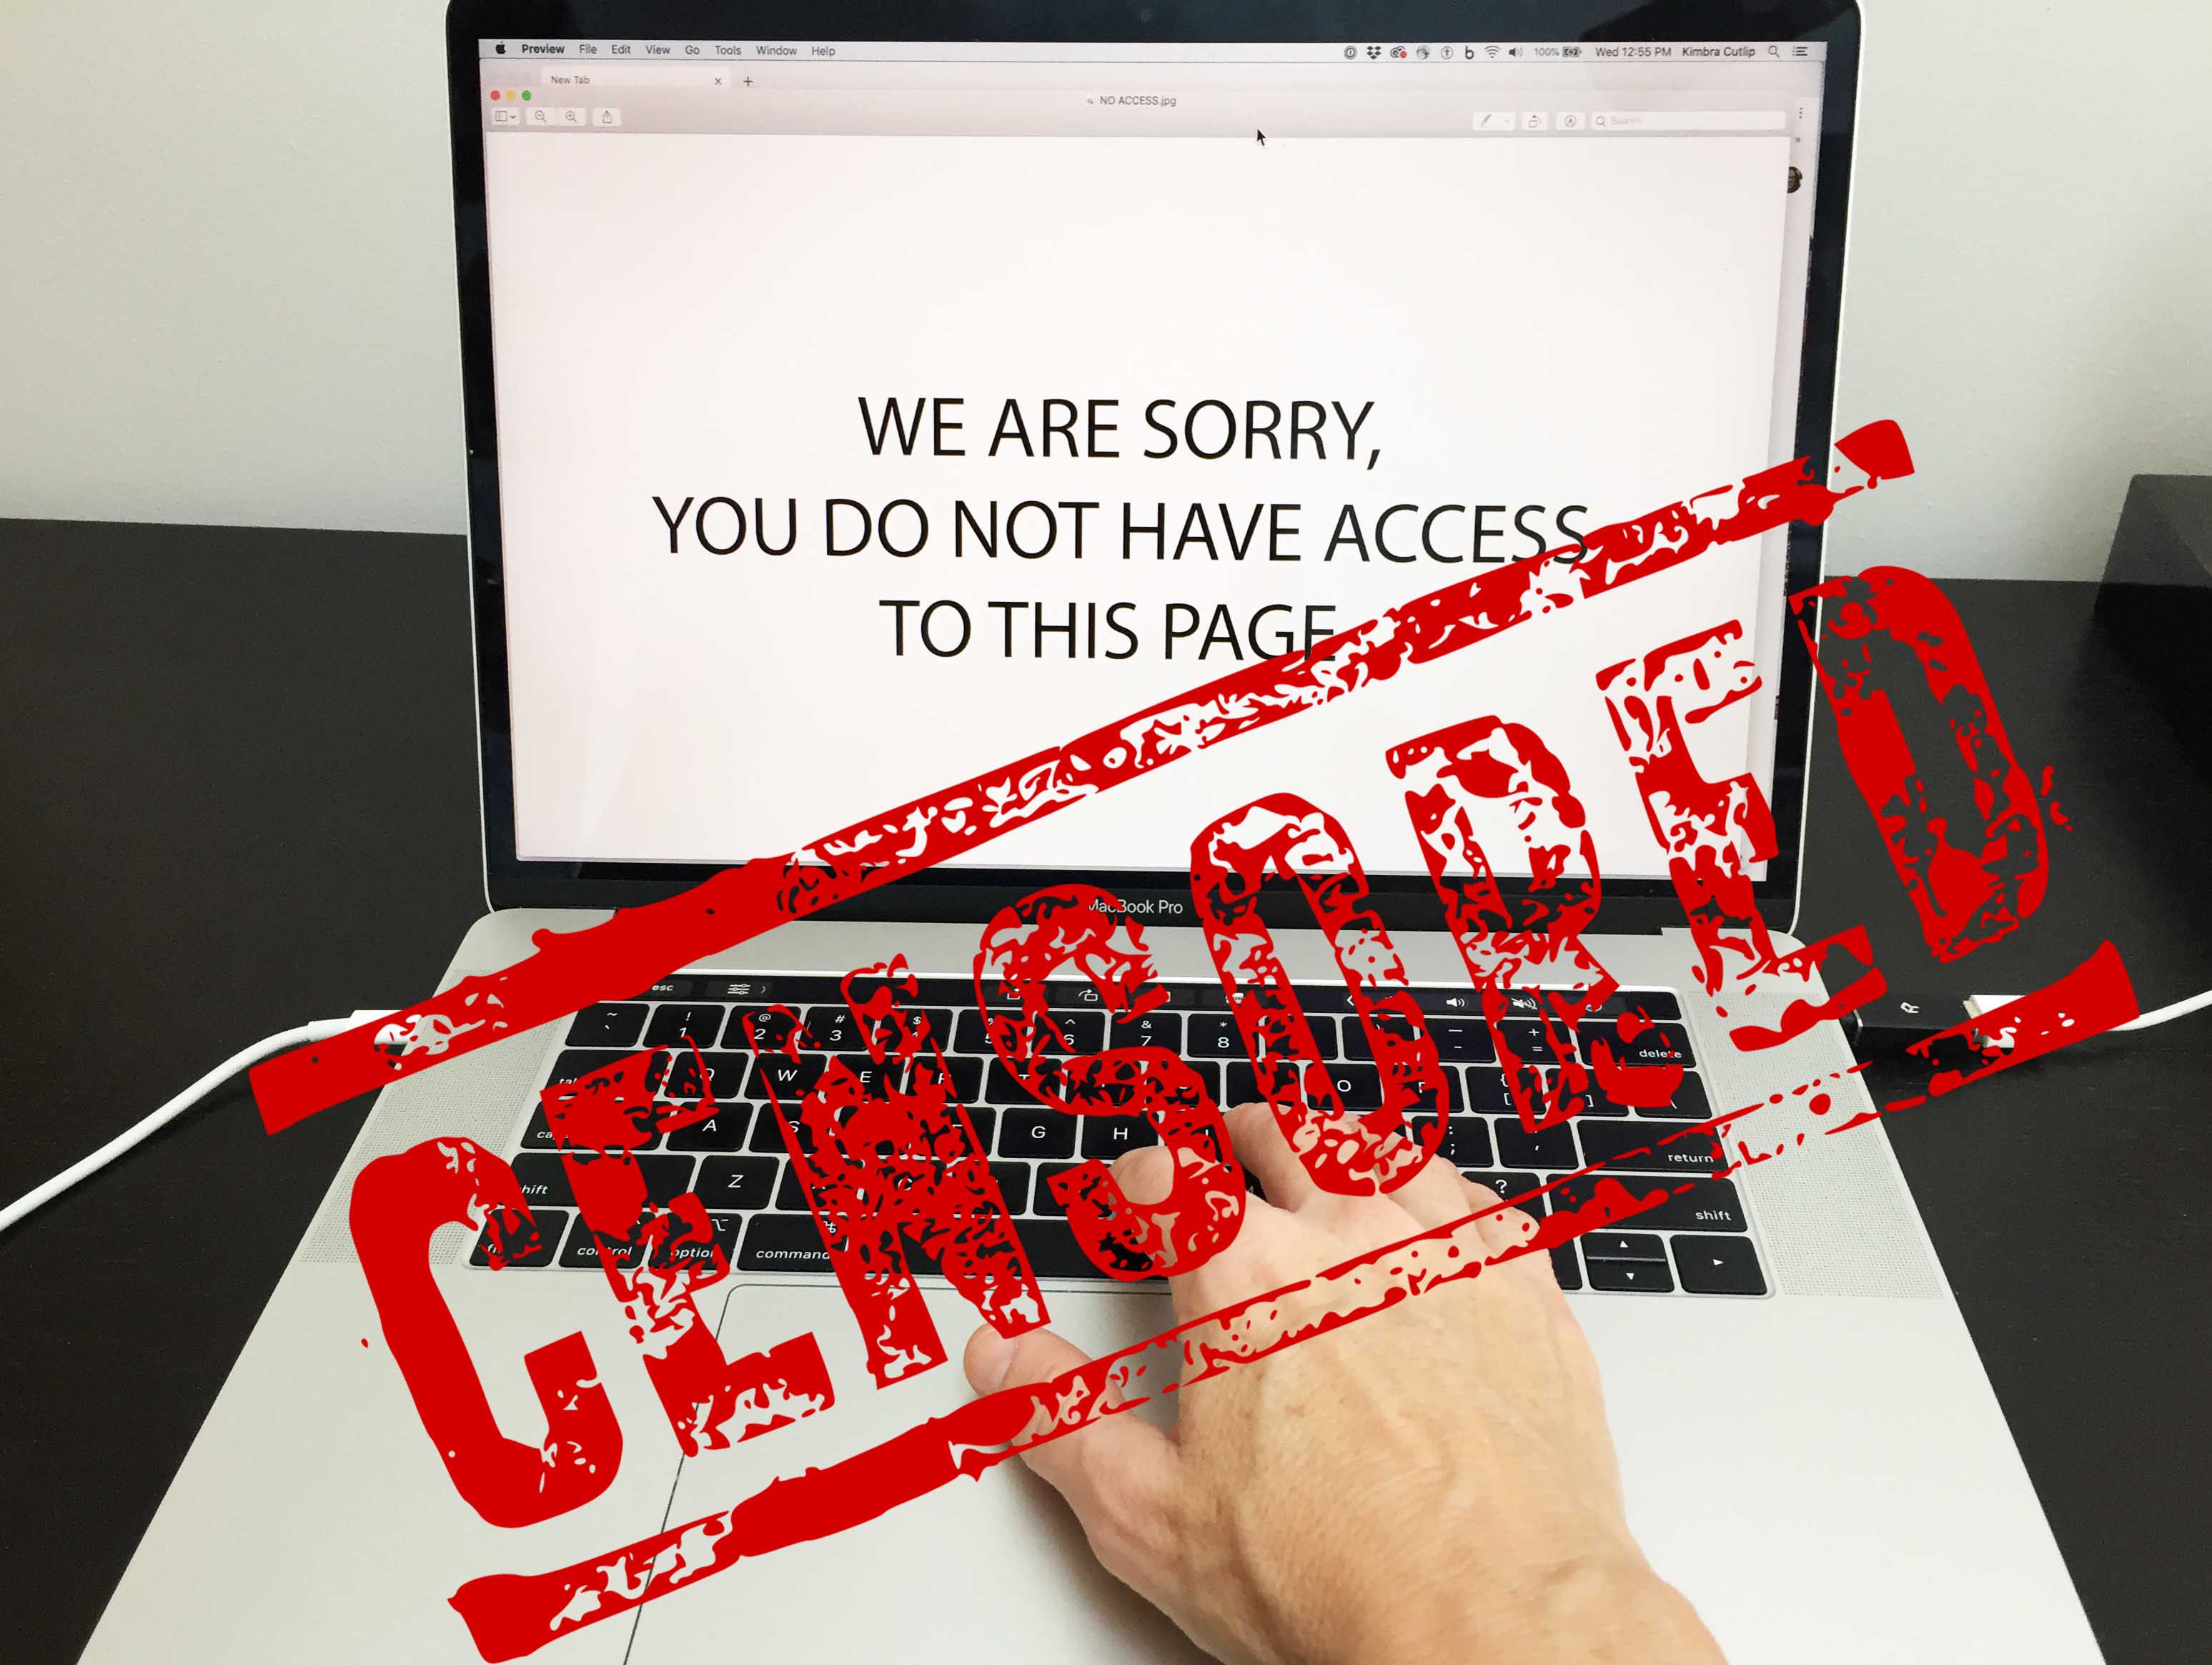  Internet censorship by governments around the world prevents millions of people from freely accessing information. Using a novel genetic algorithm, UMD researchers developed an artificial intelligence tool that automatically “learned” to evade censors in China, India and Kazakhstan and could be used to evade censors in other regimes.